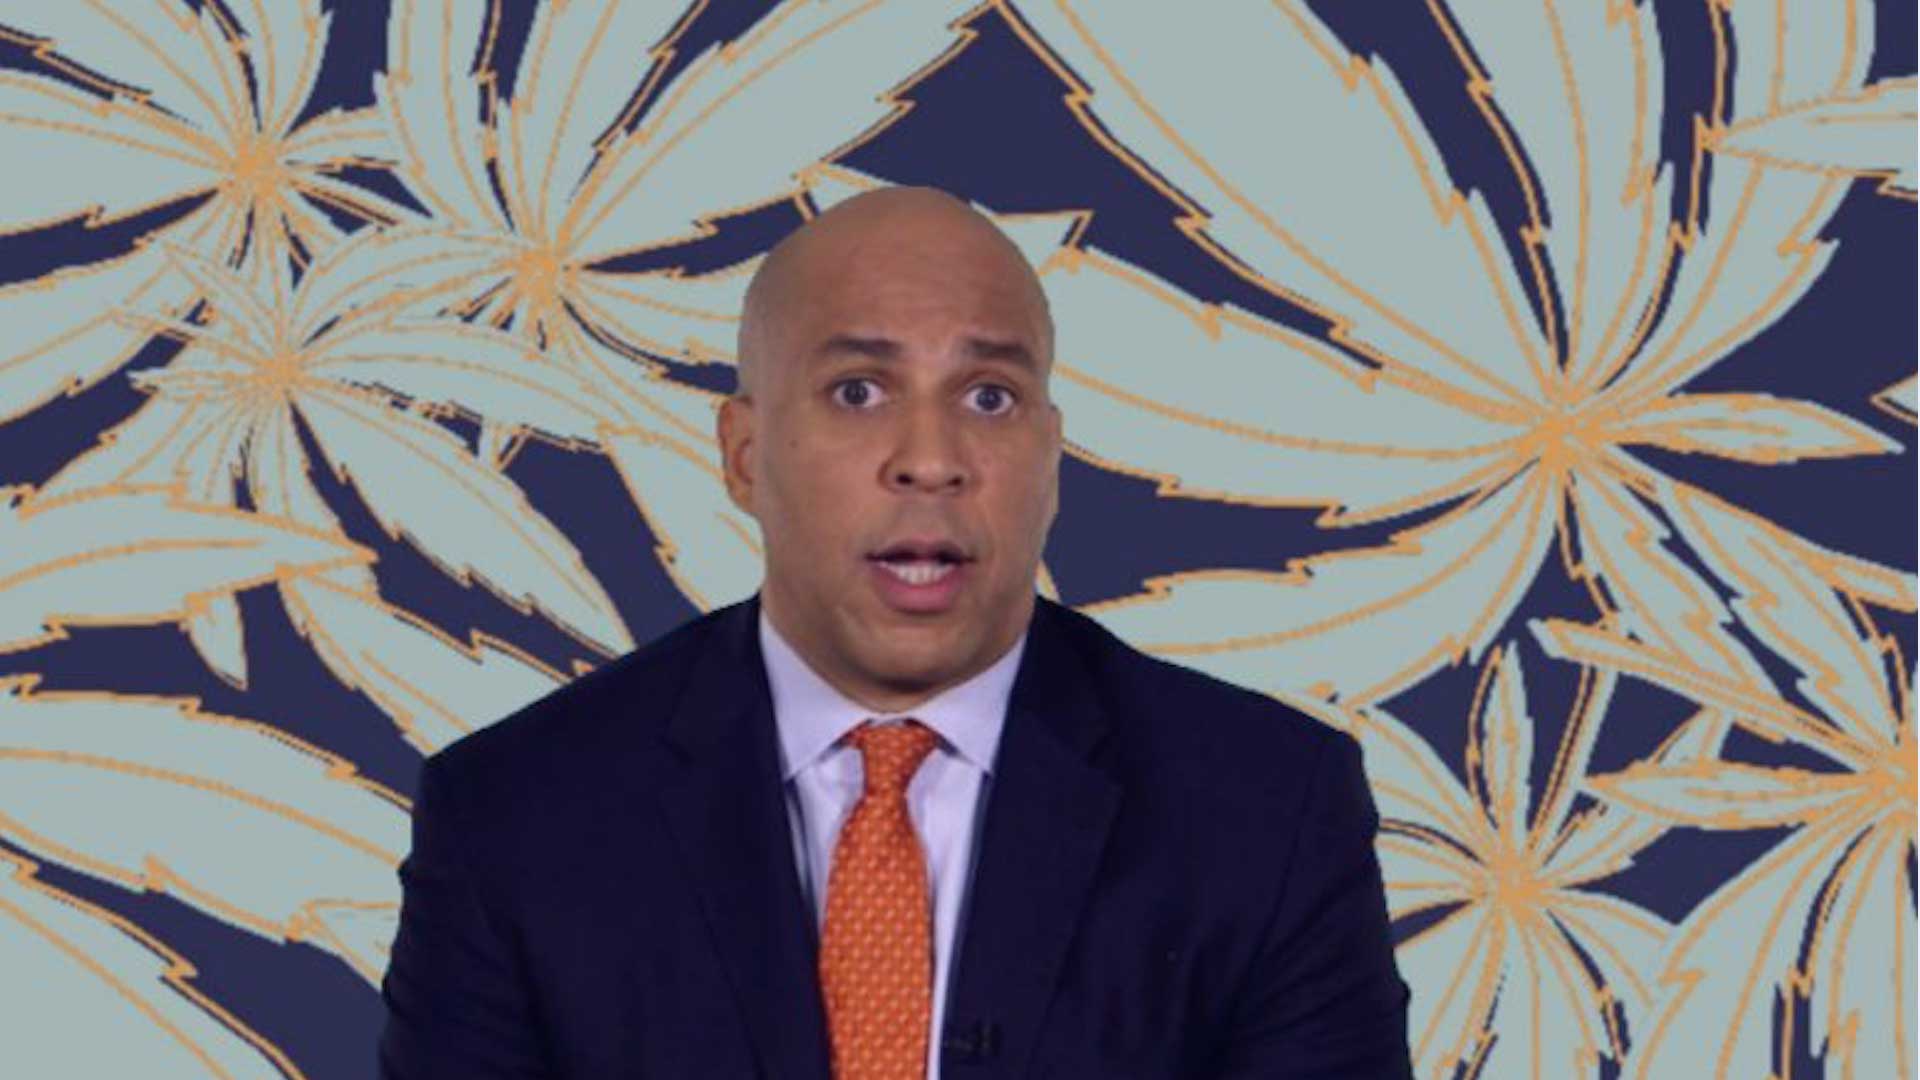 Corey Booker is trying to pass national cannabis legislation